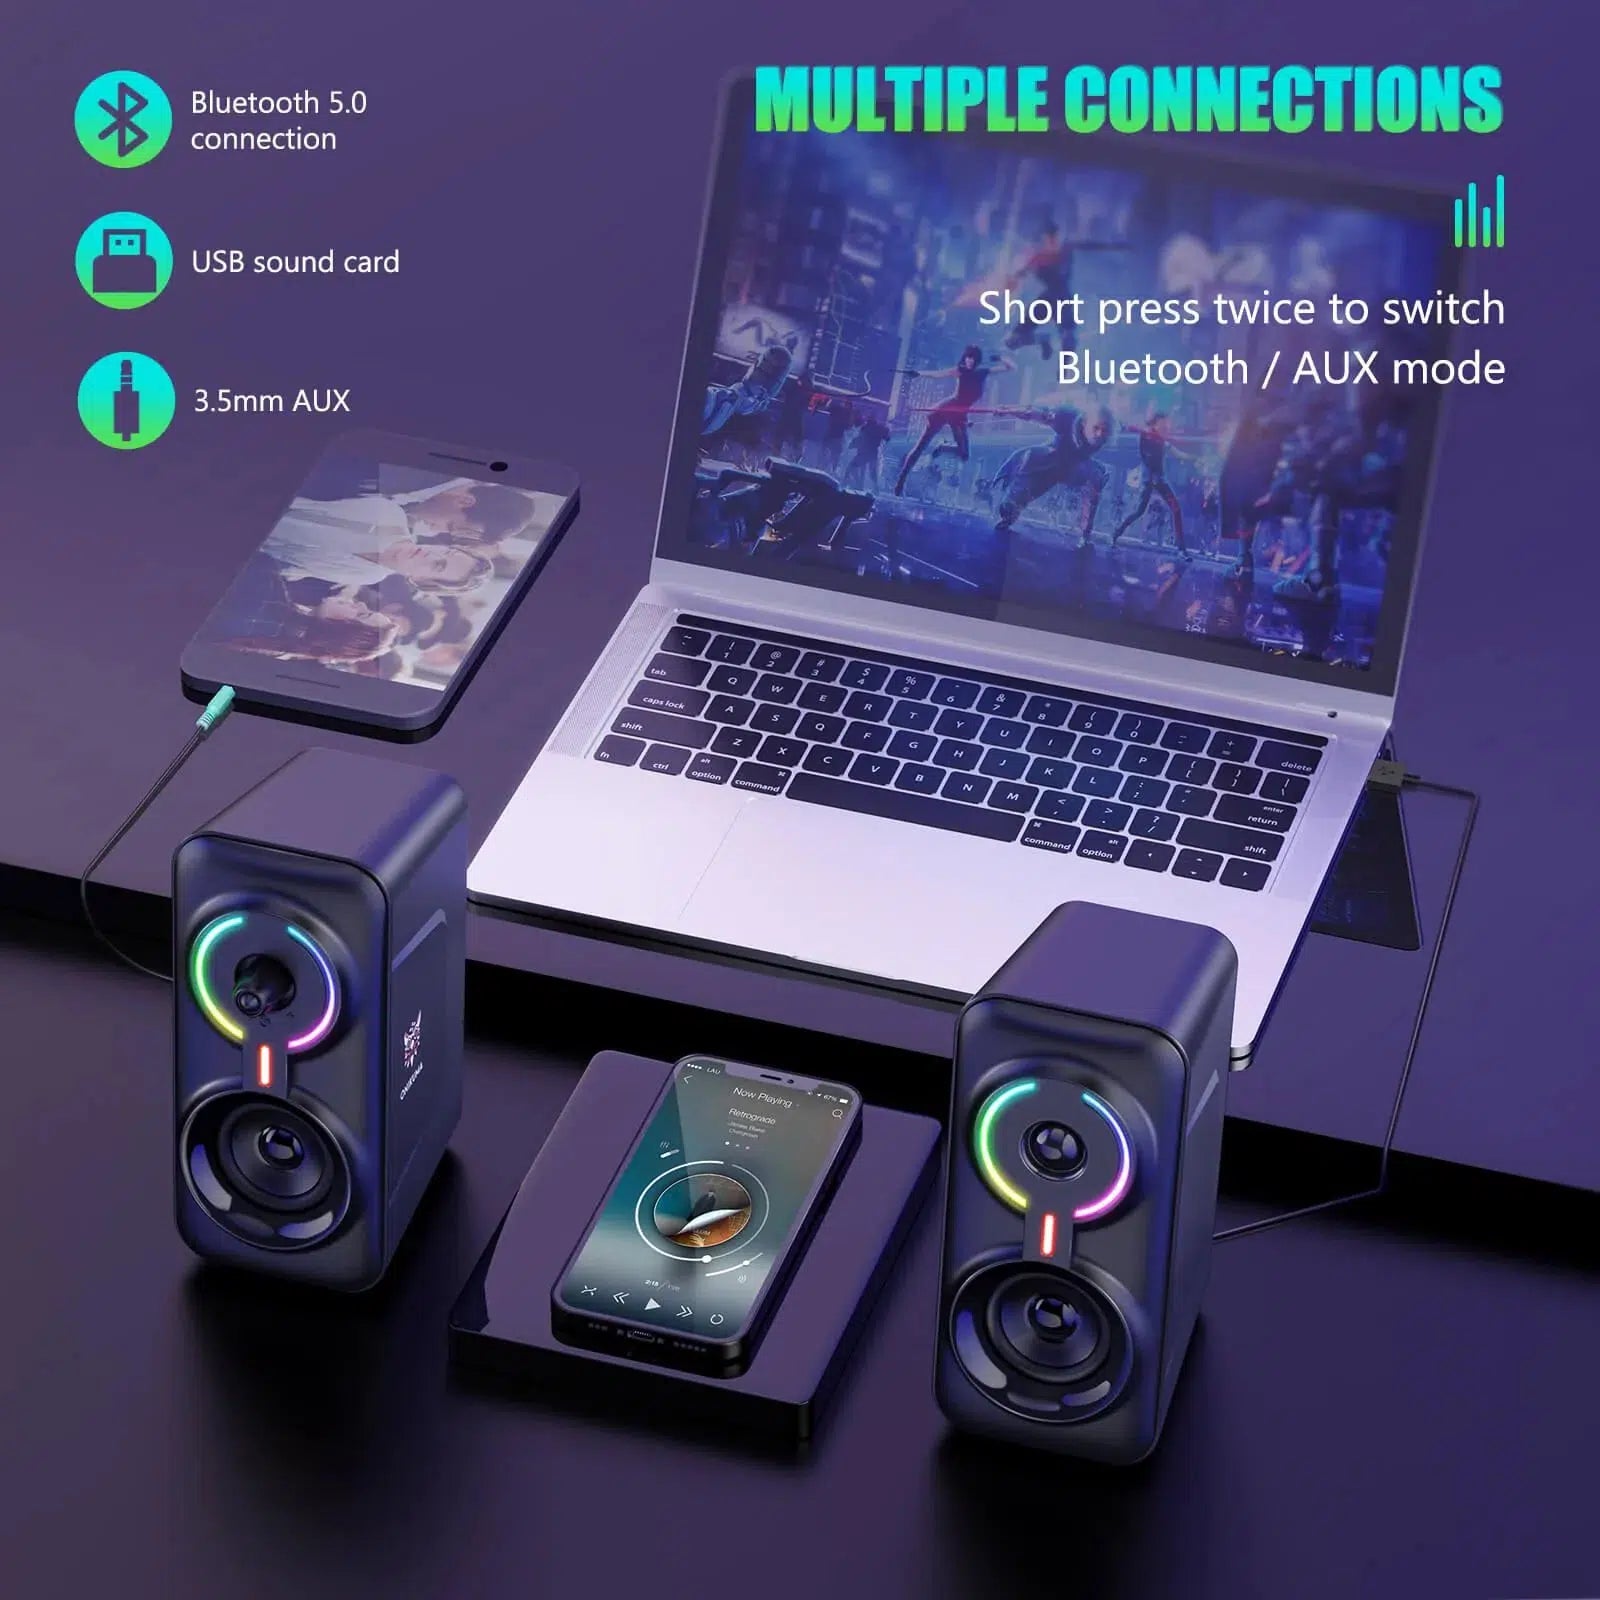 multiple connections | ONIKUMA L6 Multimedia Gaming Speaker with BT5.0 and AUX Mode